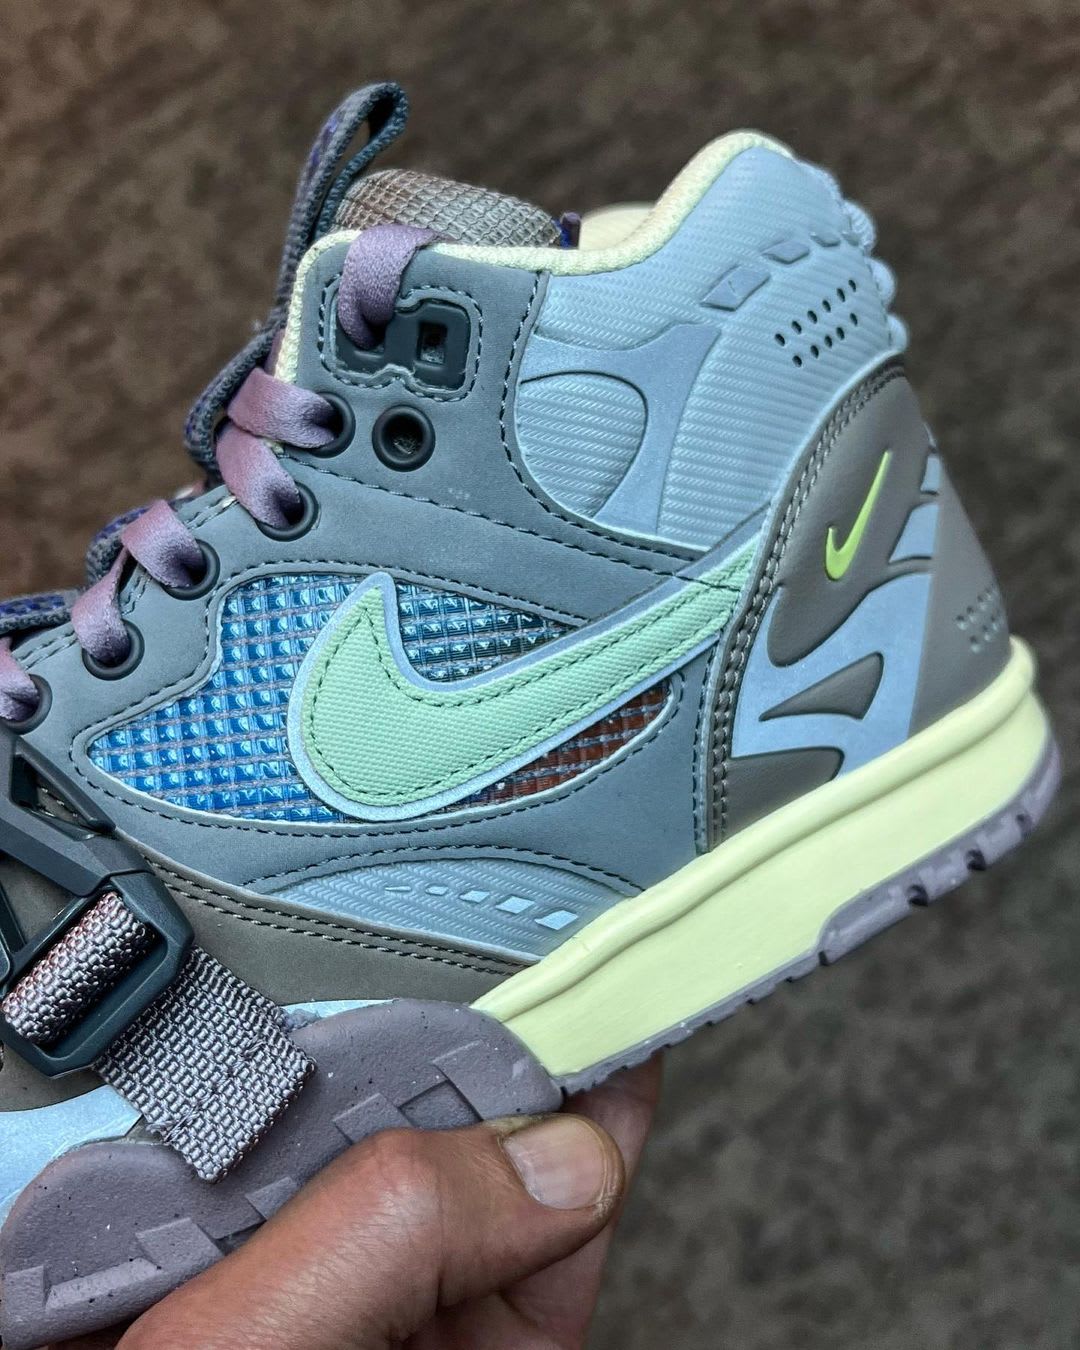 Nike Air Trainer 1 SP Release Date & First Look 2022 | Sole Collector